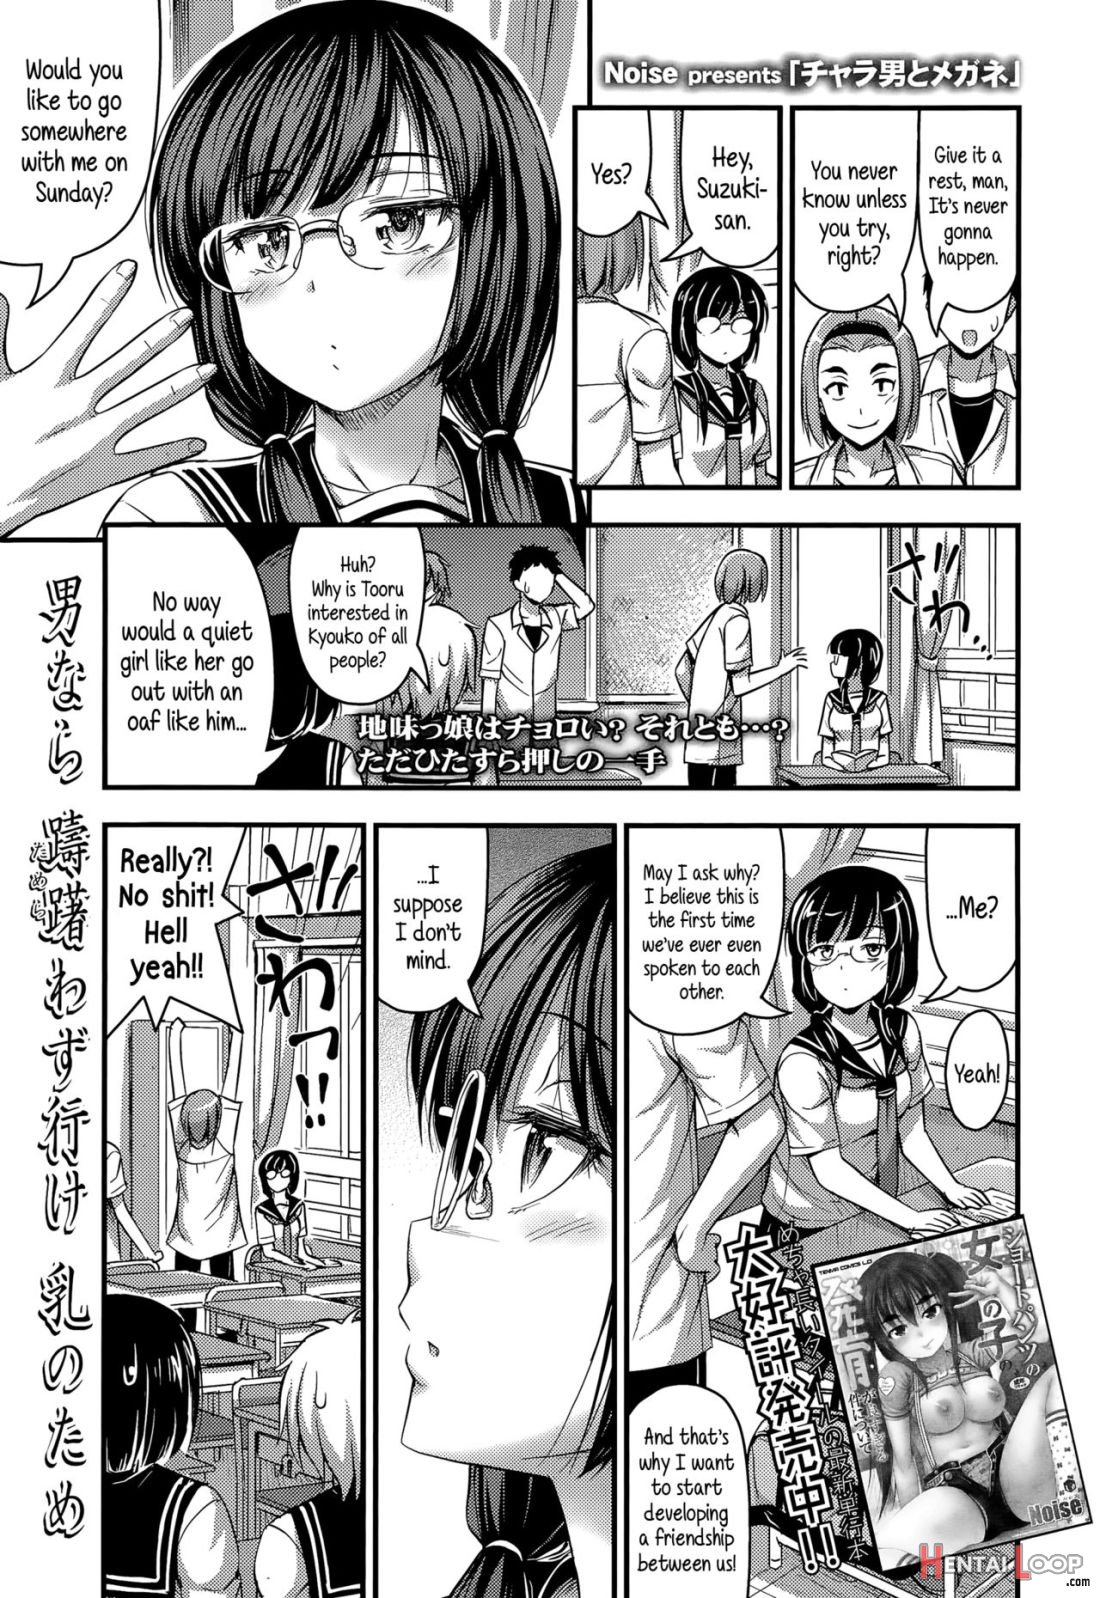 Charao To Megane page 1